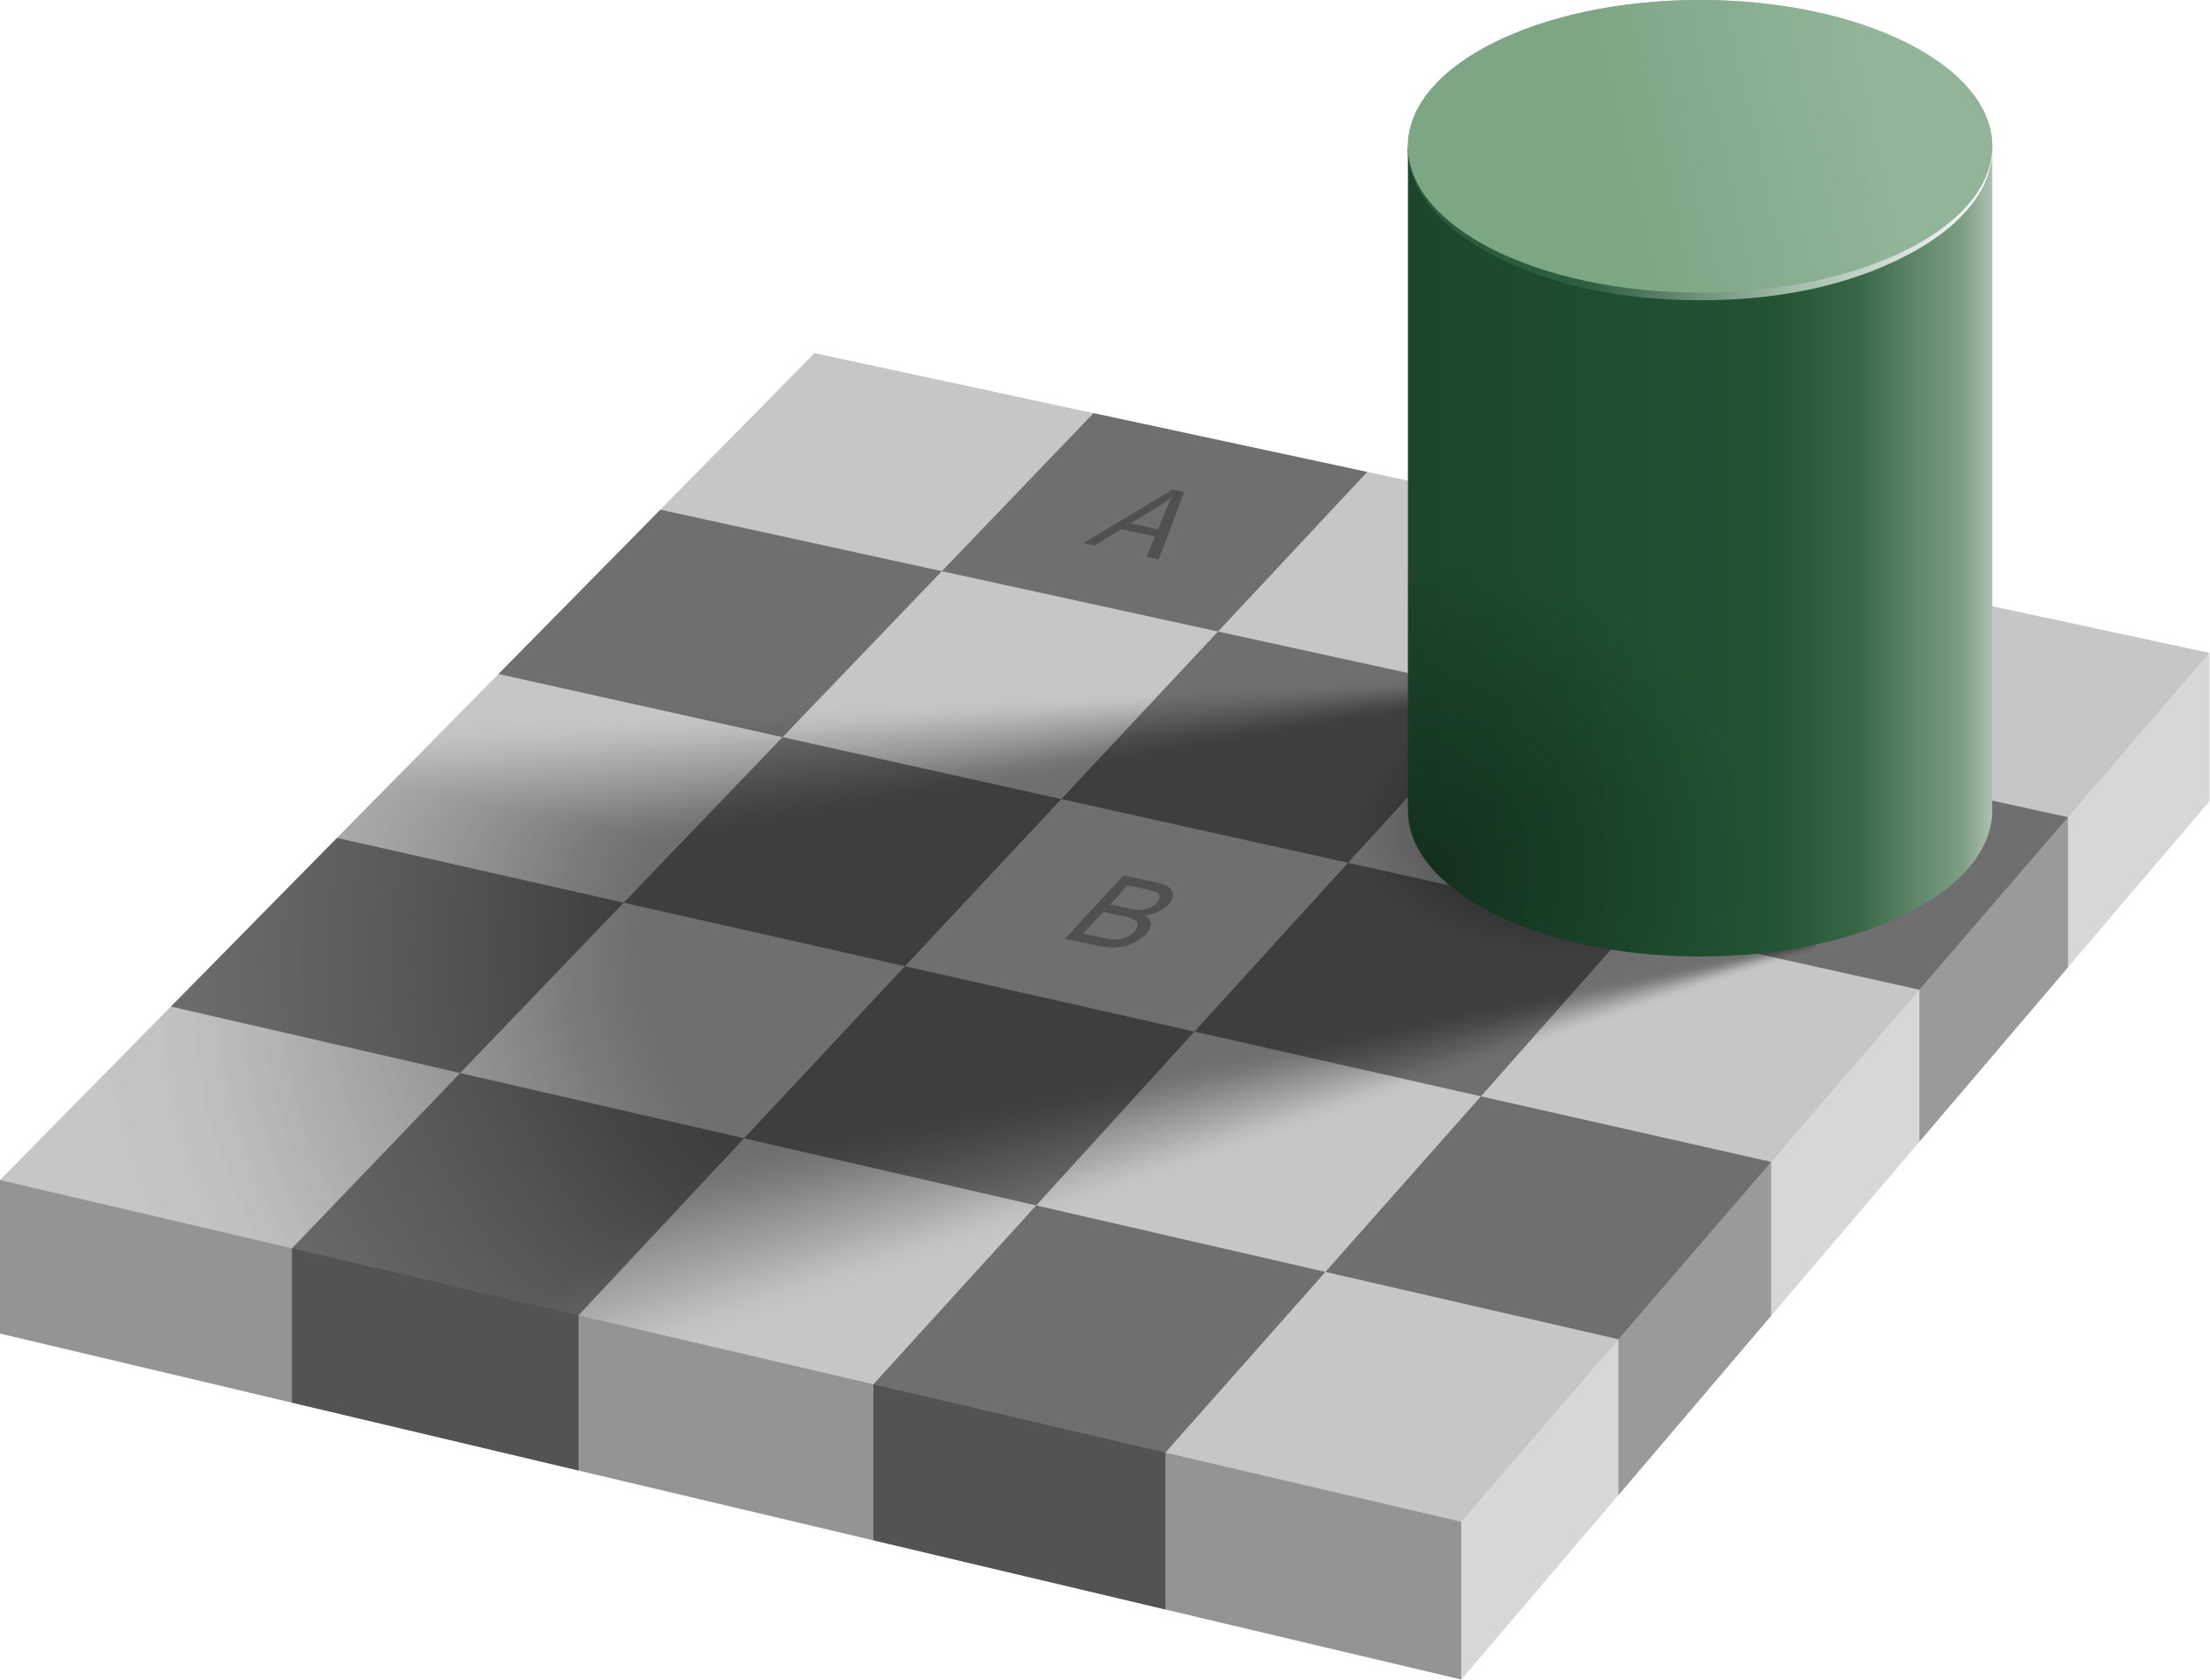 The checker shadow illusion. Although square A appears a darker shade of gray than square B, in the image the two have exactly the same luminance.